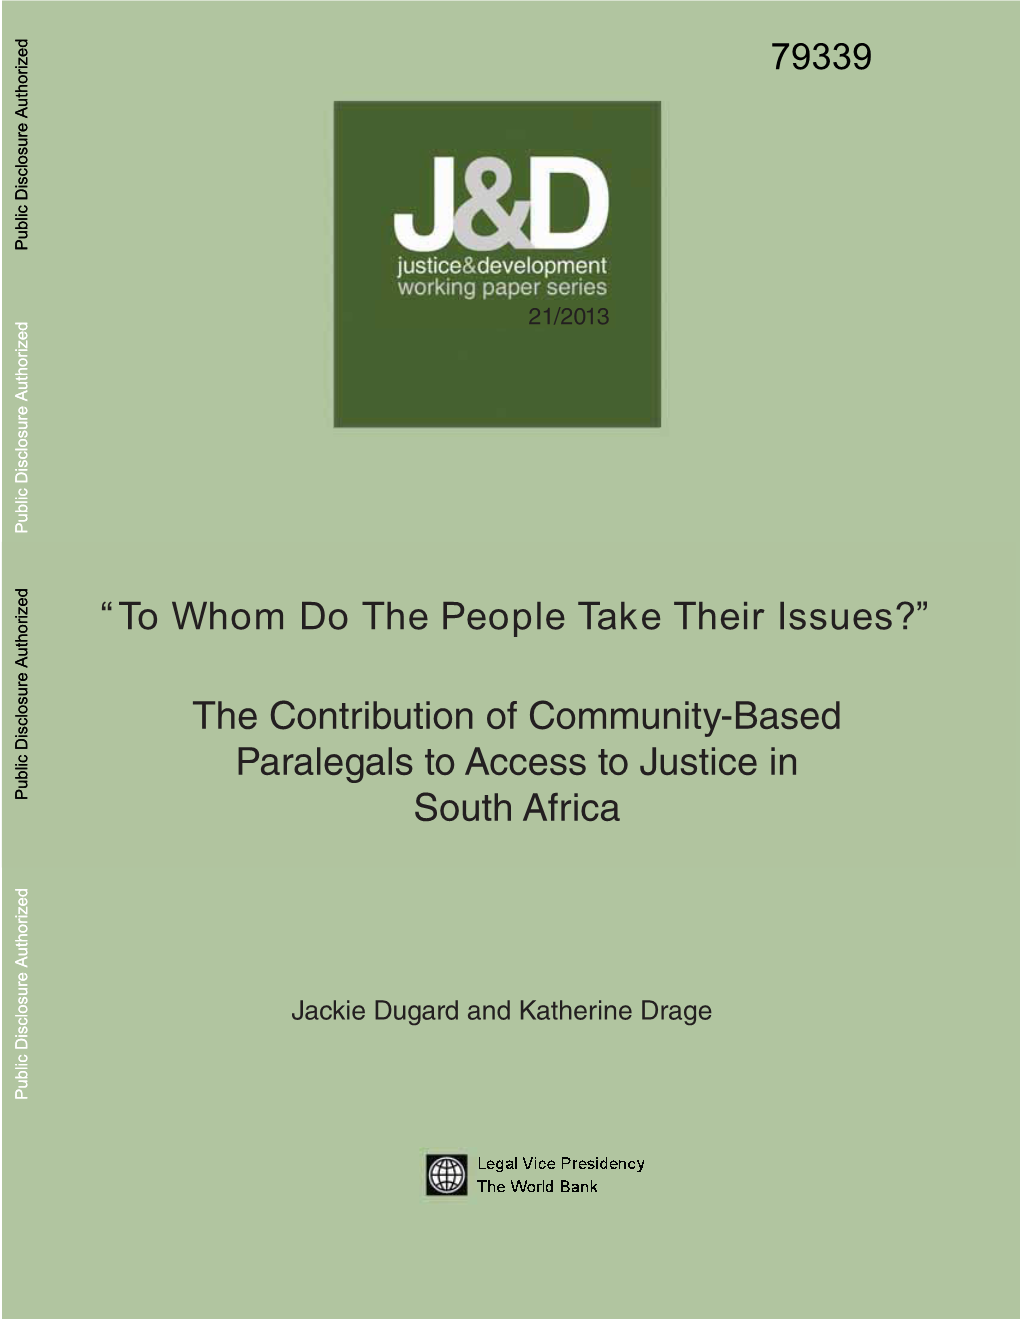 3.1. Paralegals in Lawyer-Support Roles: Litigating Ngos and Legal Aid South Africa (LASA)